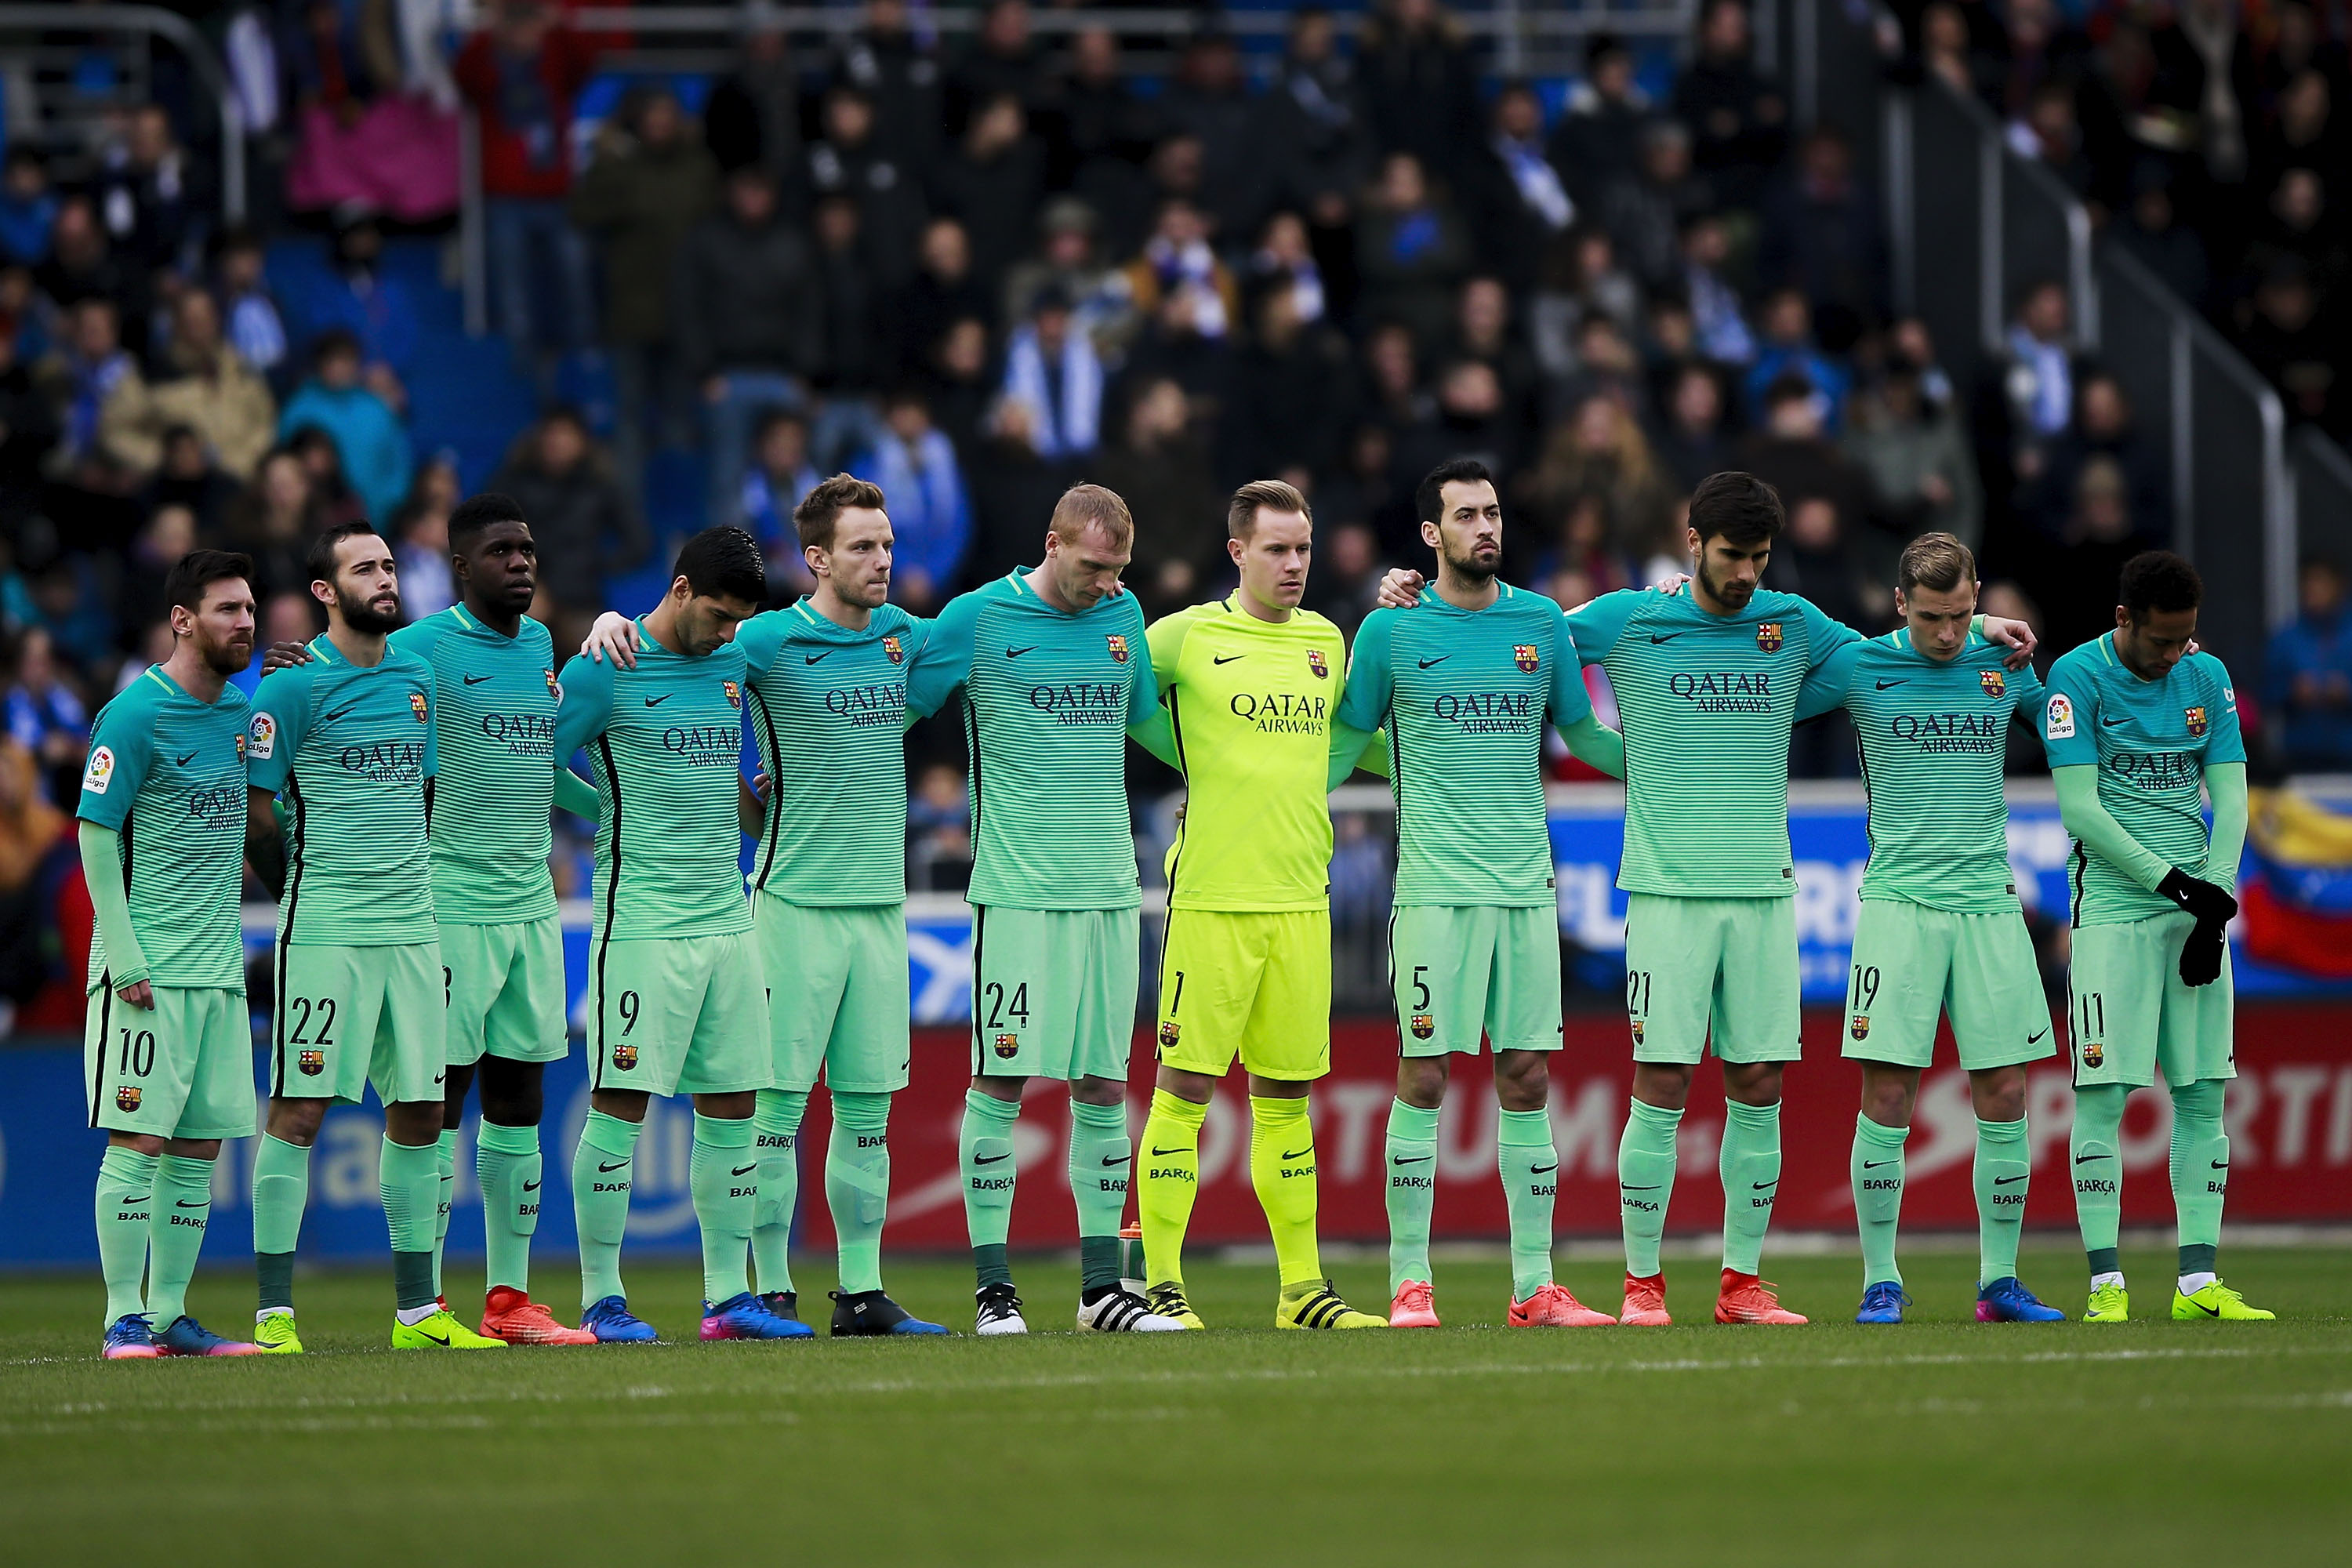 VITORIA-GASTEIZ, SPAIN - FEBRUARY 11:  FC barcelona players observe one minute of silence in honor of Angola victims prior to start the La Liga match between Deportivo Alaves and FC Barcelona at Estadio de Mendizorroza on February 11, 2017 in Vitoria-Gasteiz, Spain.  (Photo by Gonzalo Arroyo Moreno/Getty Images)